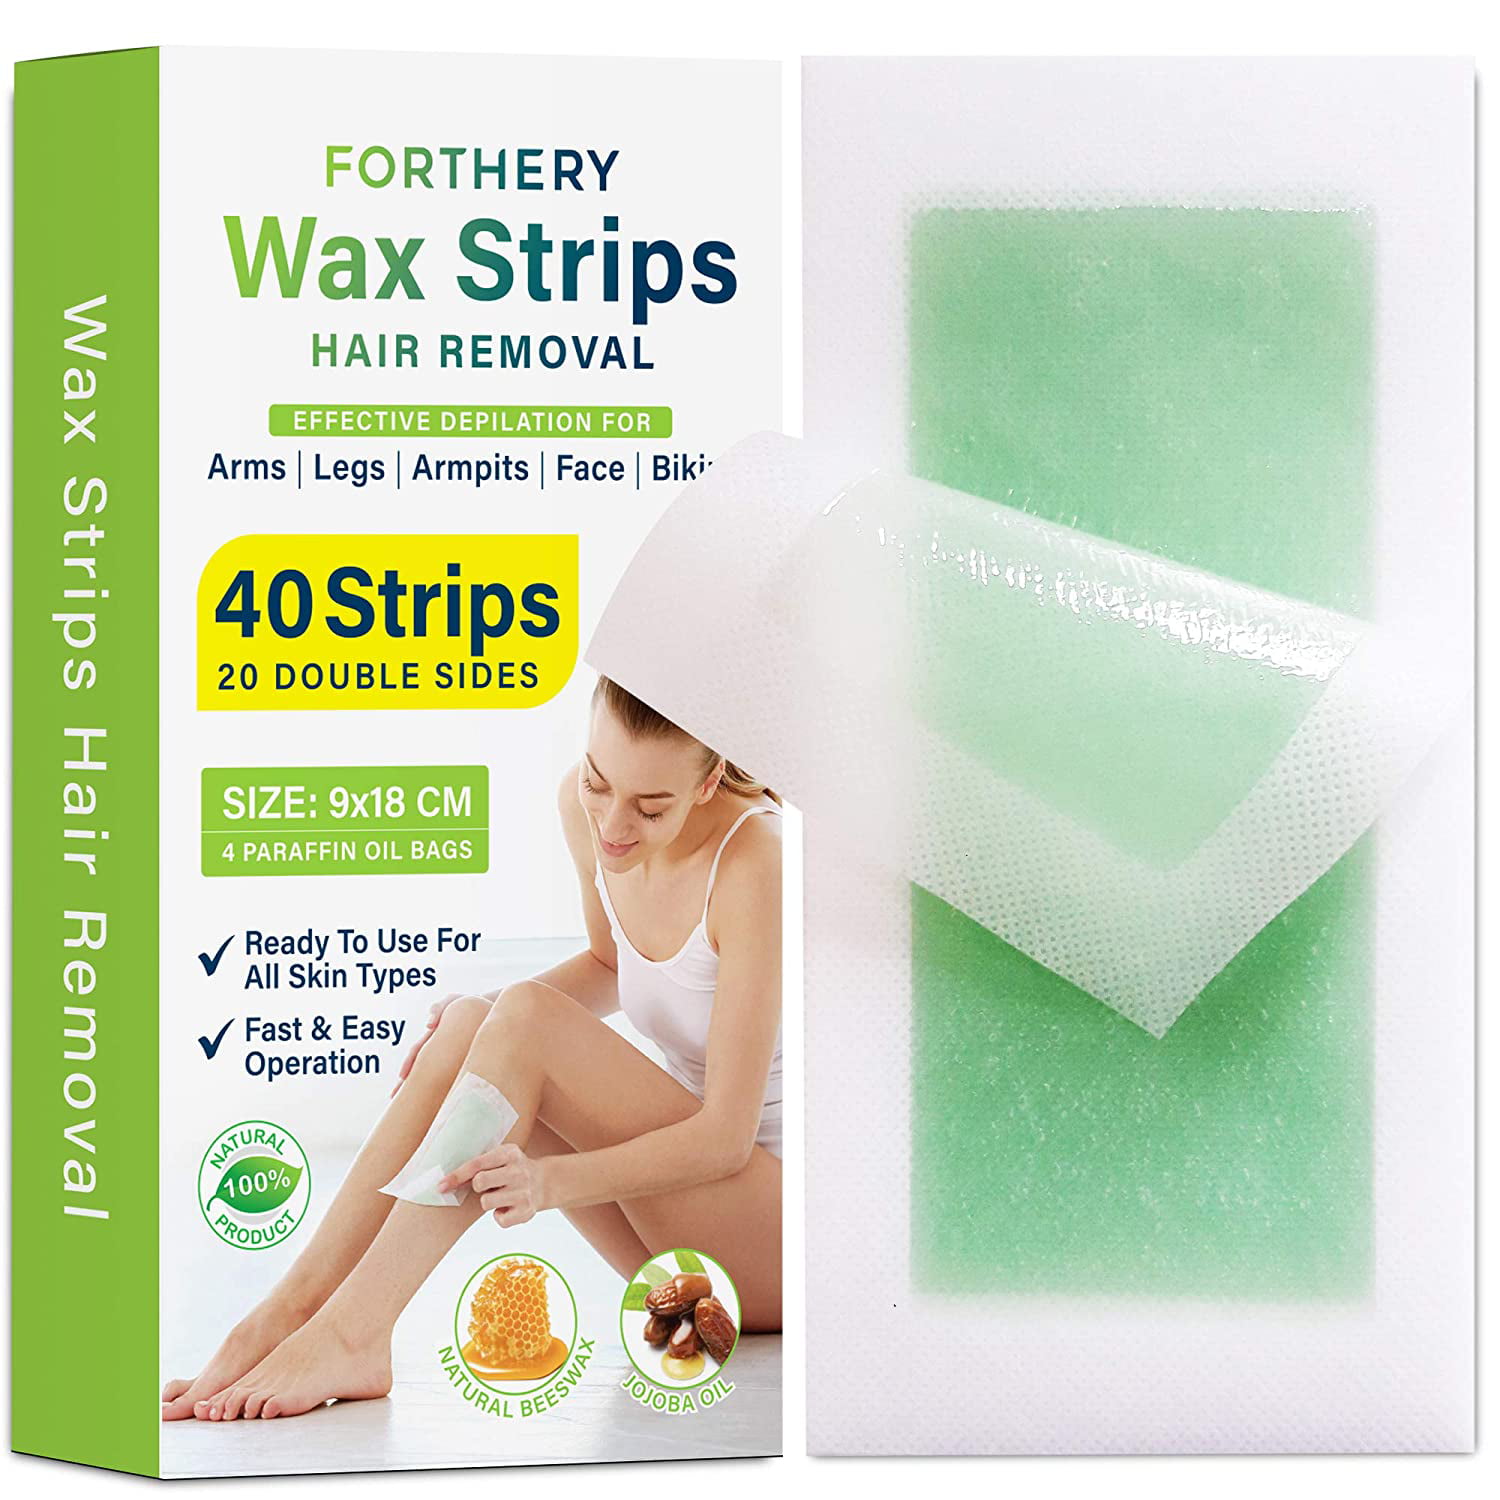 Wax Strips Hair Removal Kit - No Wait Time Keep Skin Smoothness